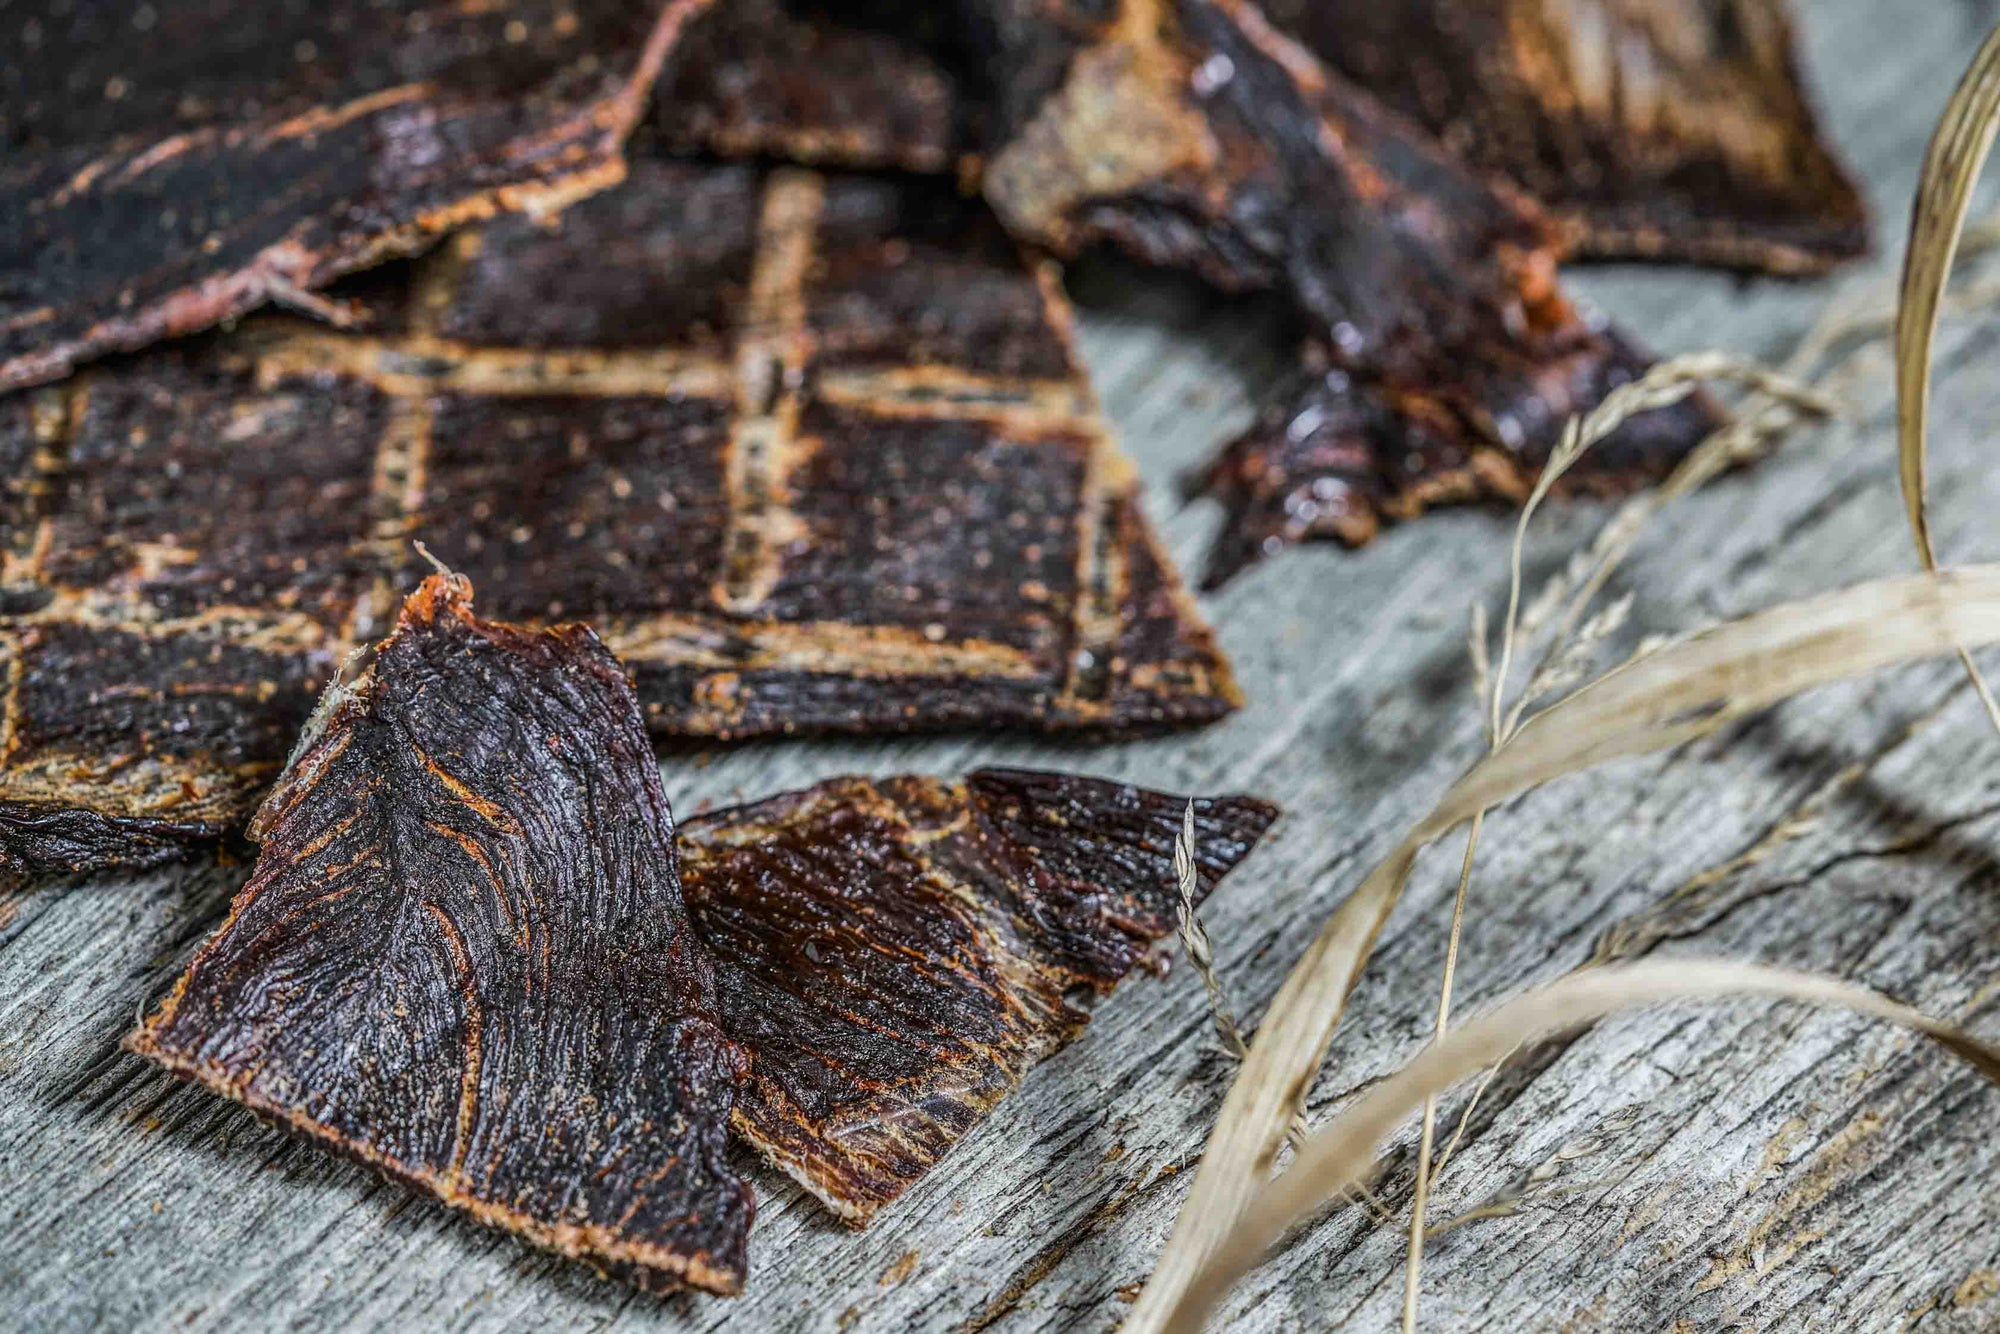 100% rocky mountain elk meat jerky snack sticks non-GMO body fuel trail hiking backpacking pure clean eating healthy health Northstar Bison no preservatives corn free gluten free soy free snacks